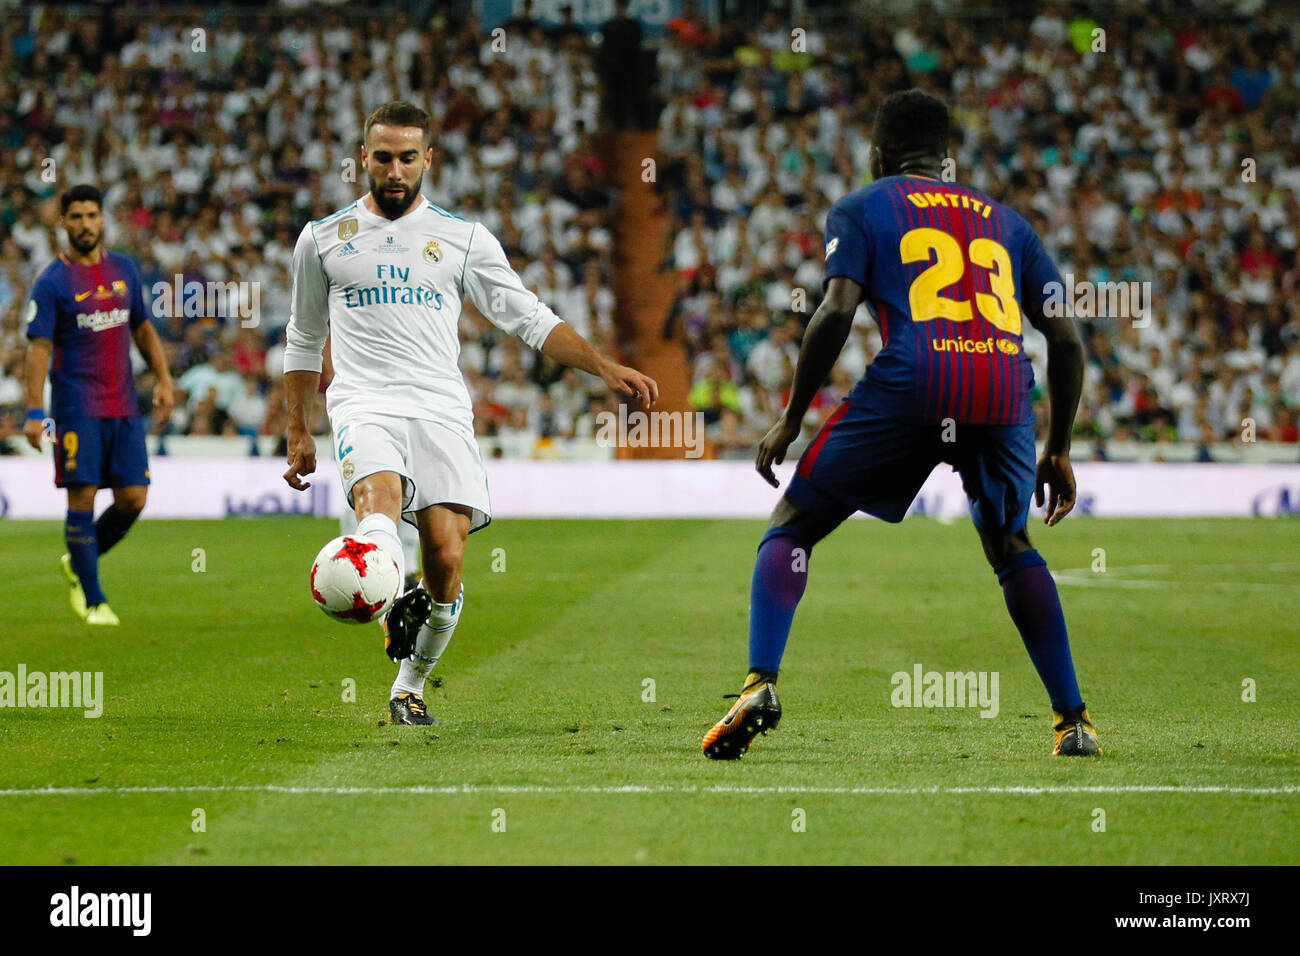 Madrid, Spain. 16th Aug, 2017. Daniel Carvajal Ramos (2) Real Madrid's player. Samuel Umtiti (23) FC Barcelona's player.SPANISH SUPER CUP between Real Madrid vs FC Barcelona at the Santiago Bernabeu stadium in Madrid, Spain, August 16, 2017 . Credit: Gtres Información más Comuniación on line,S.L./Alamy Live News Stock Photo